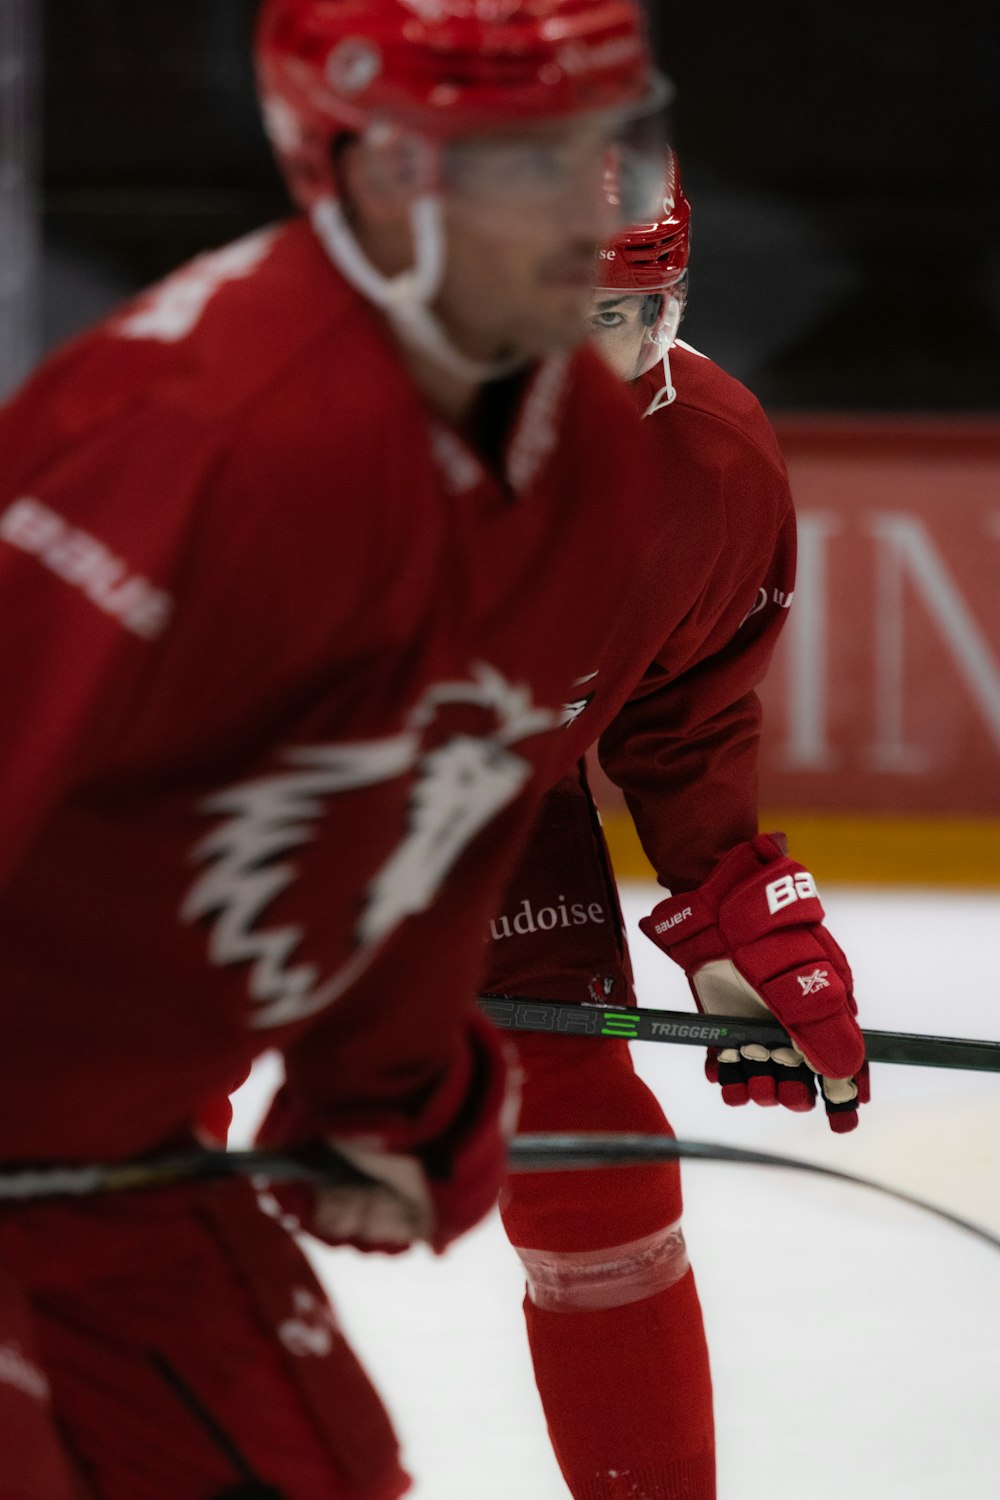 a man in a red uniform is playing hockey